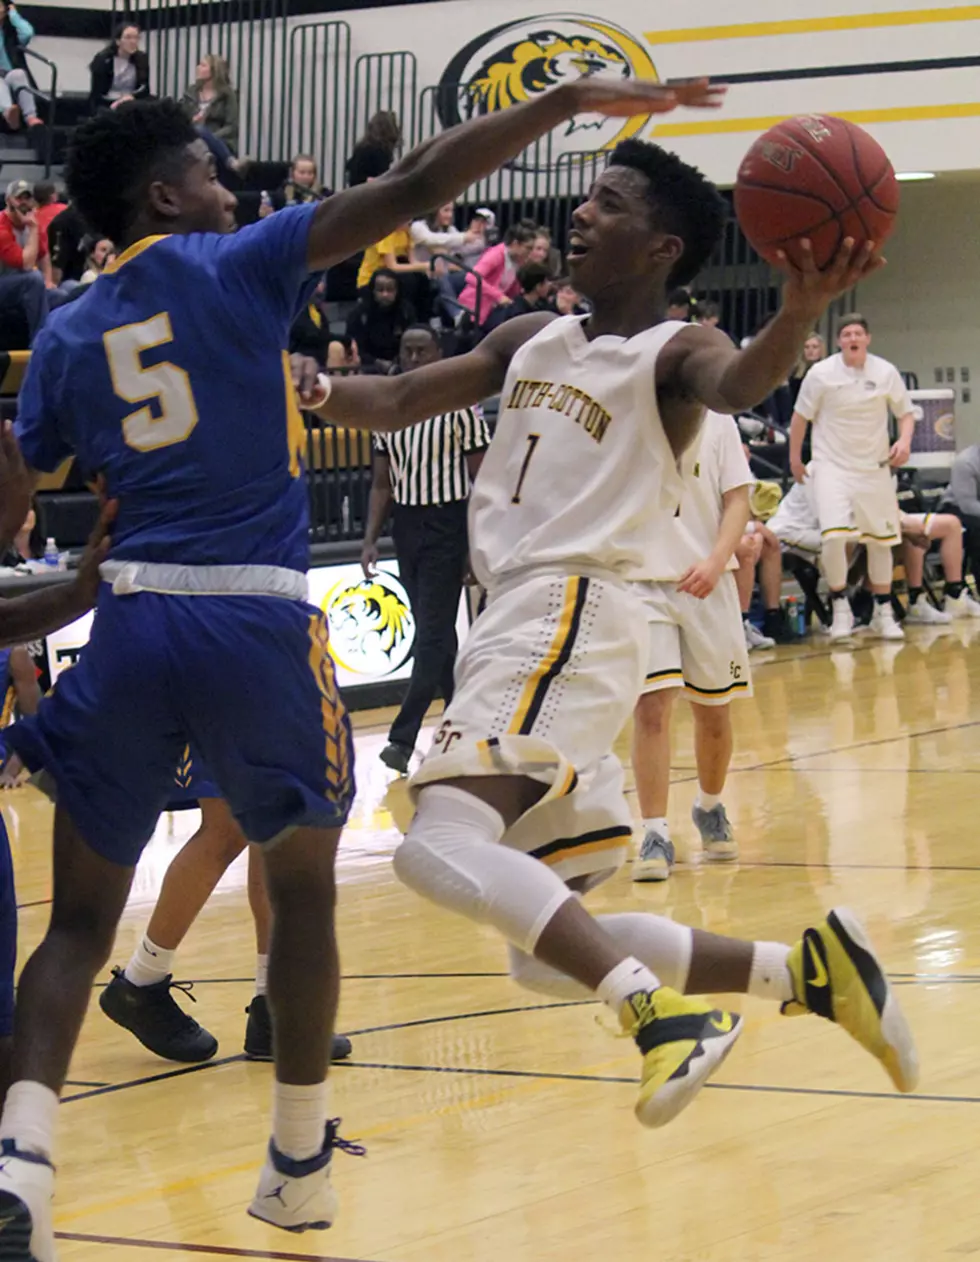 Smith-Cotton’s Buckner Named to All-West Central Conference Team